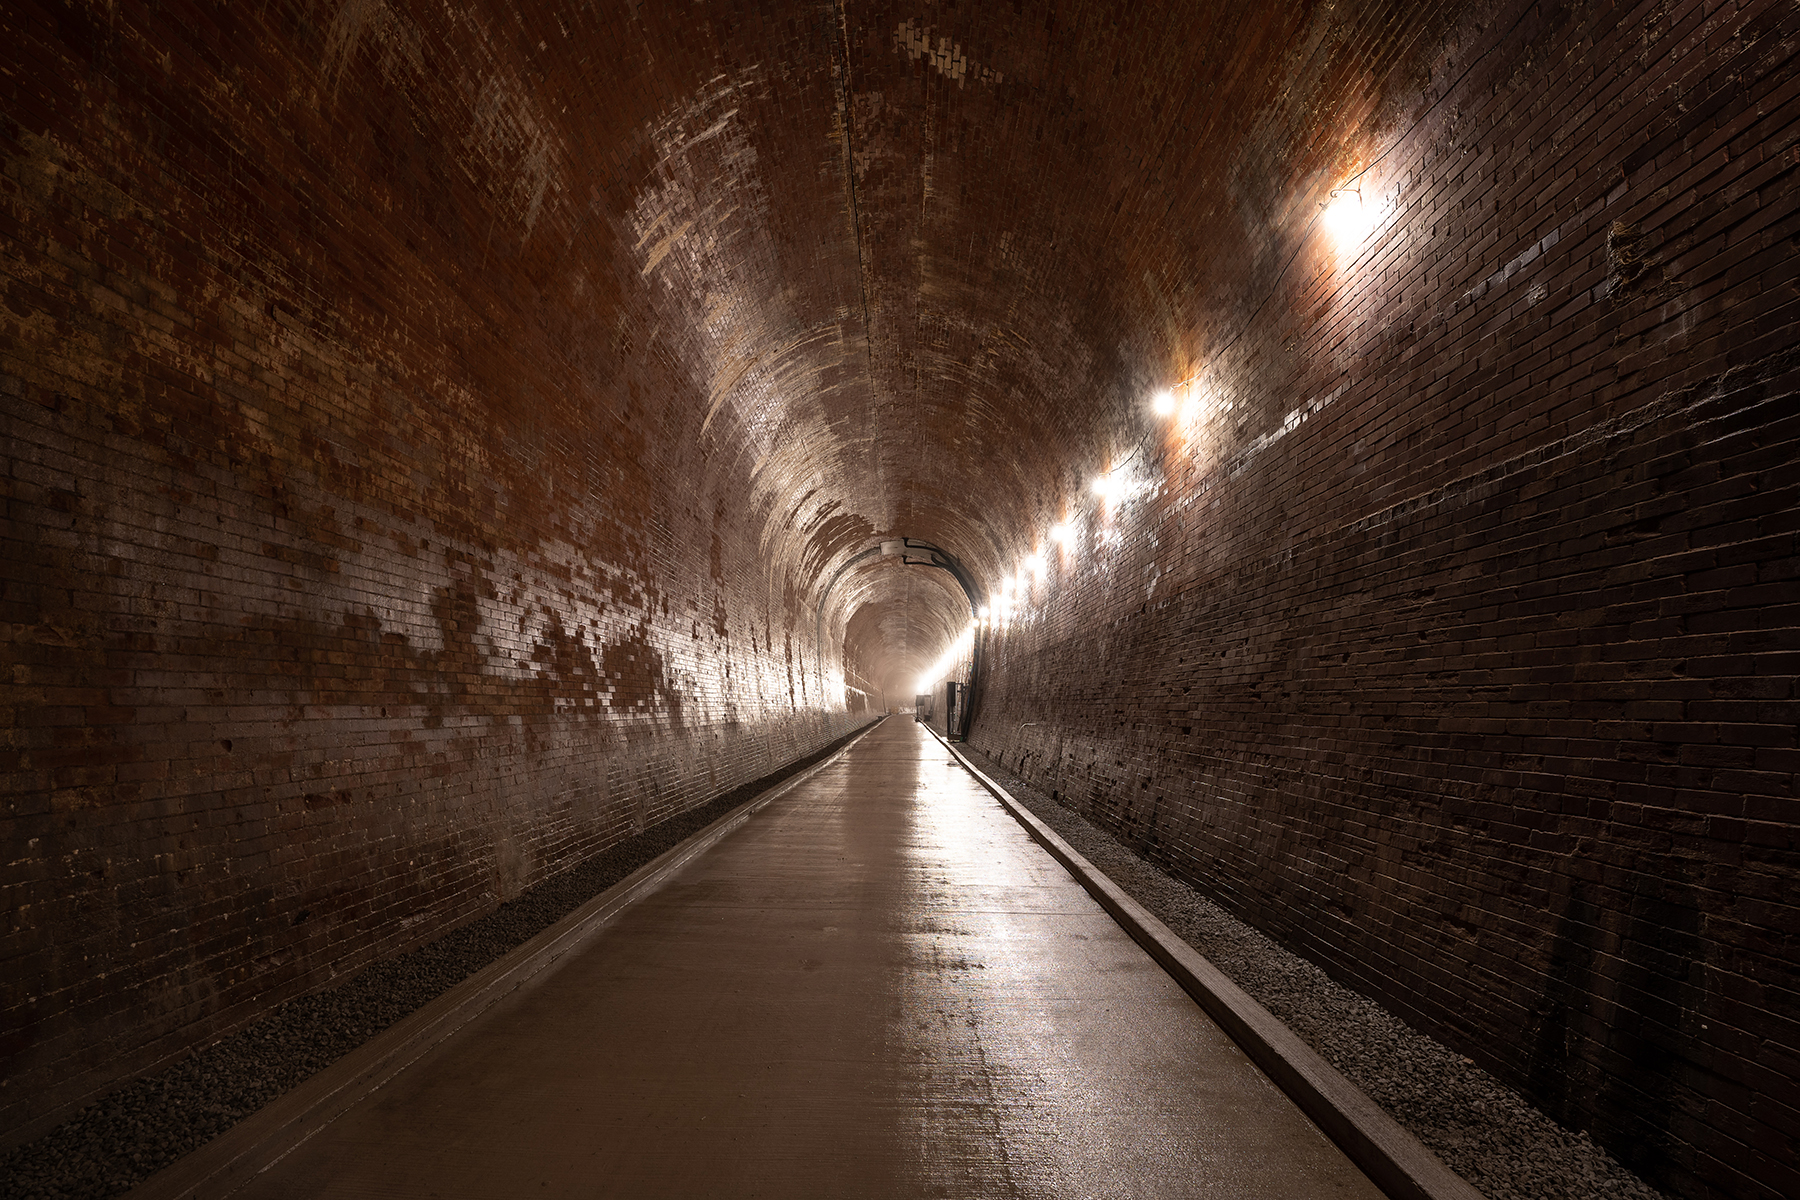 The tailrace tunnel, ready for visitors. Original tunnel construction teams took day and night shifts to assemble the structure, with evening employees fitting in arch keys as the construction progressed. (Image courtesy of Niagara Parks)